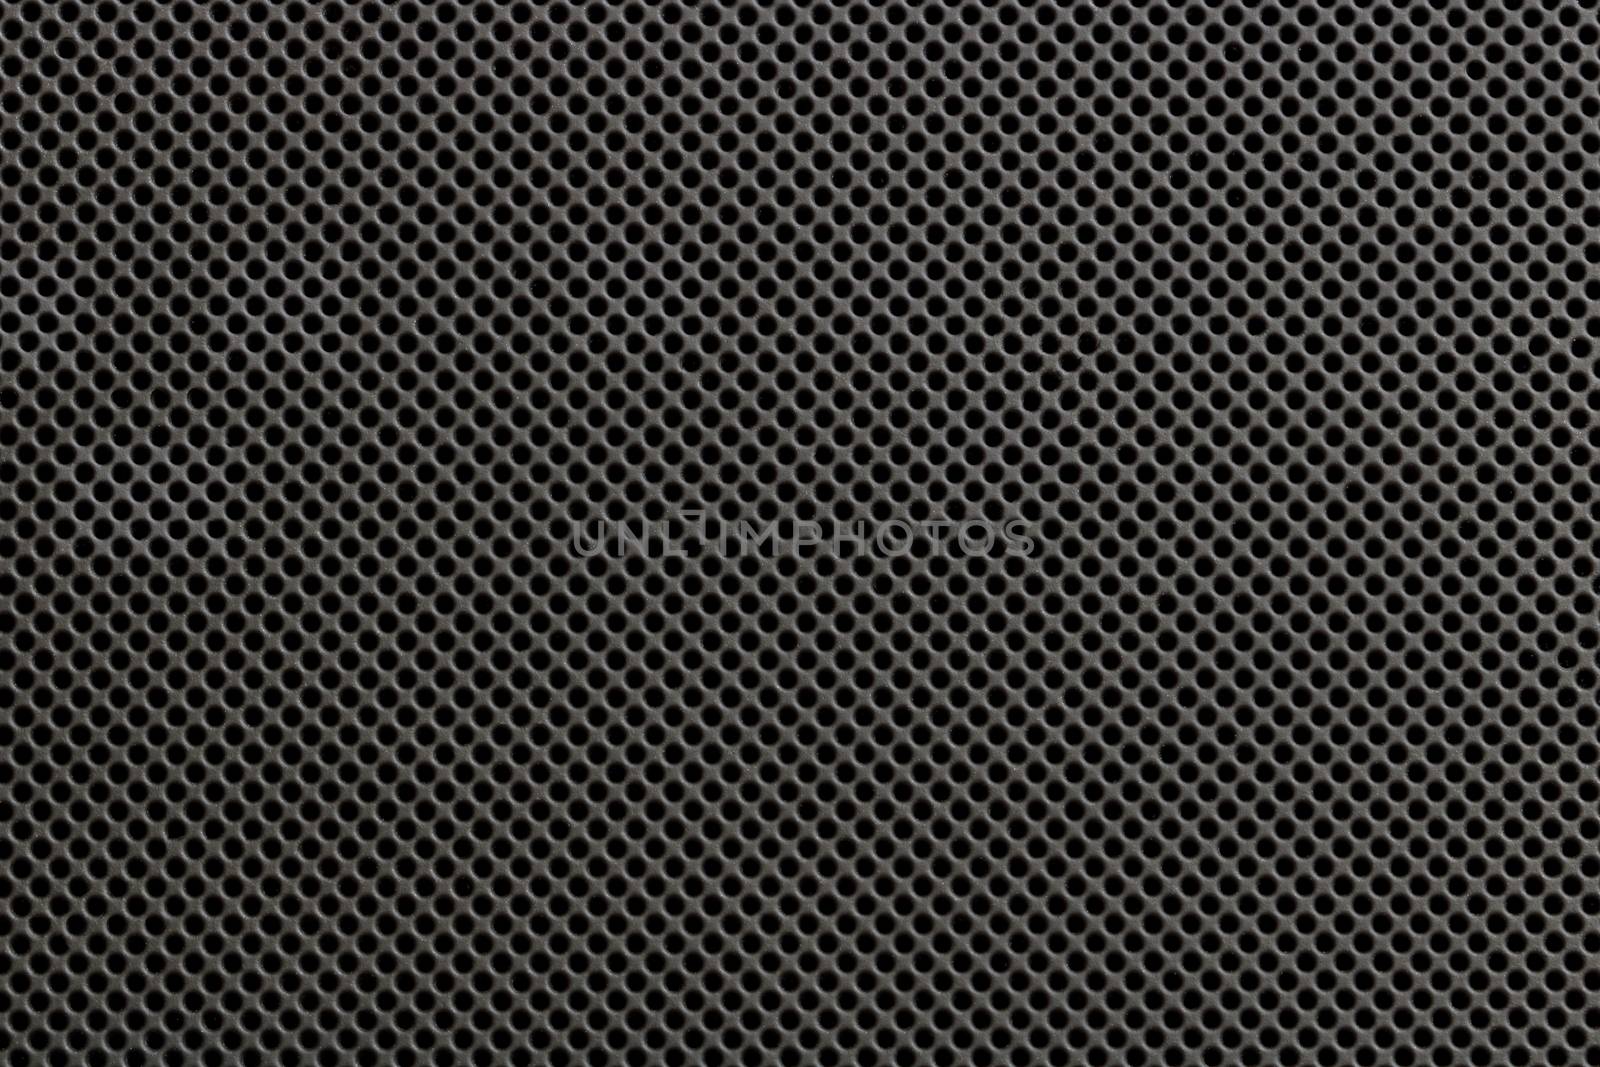 Texture of dirty on black metal grate wall, abstract pattern background